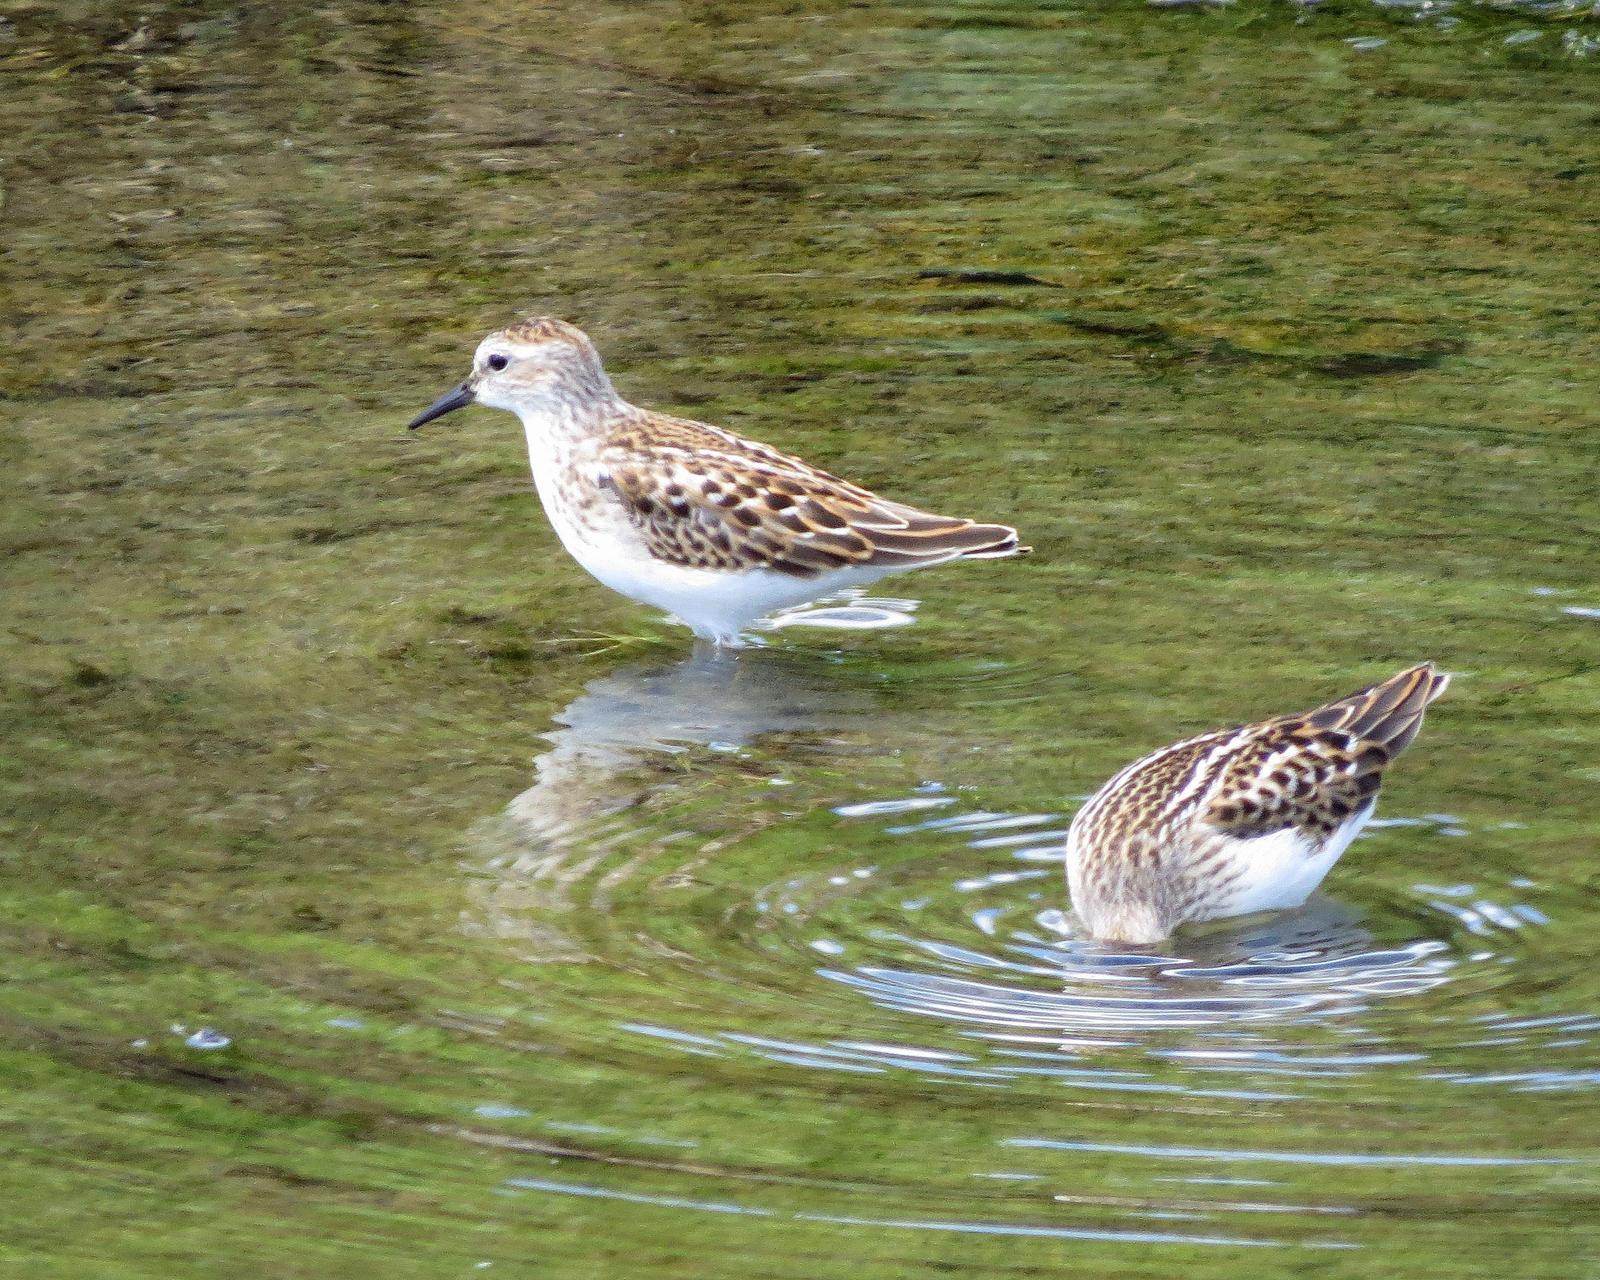 Semipalmated Sandpiper Photo by Kelly Preheim